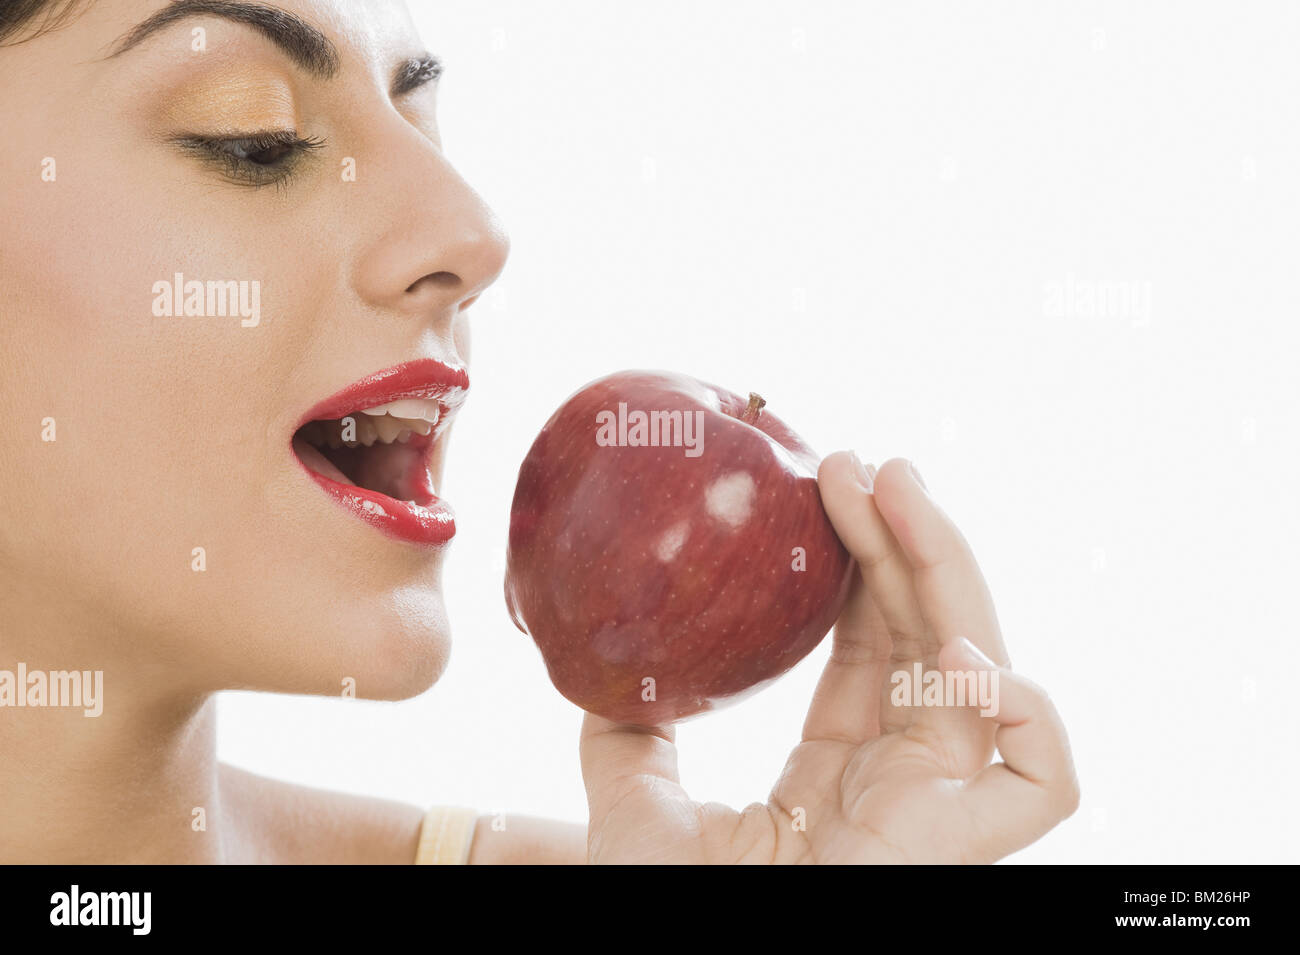 Close-up of a woman eating a red apple Stock Photo